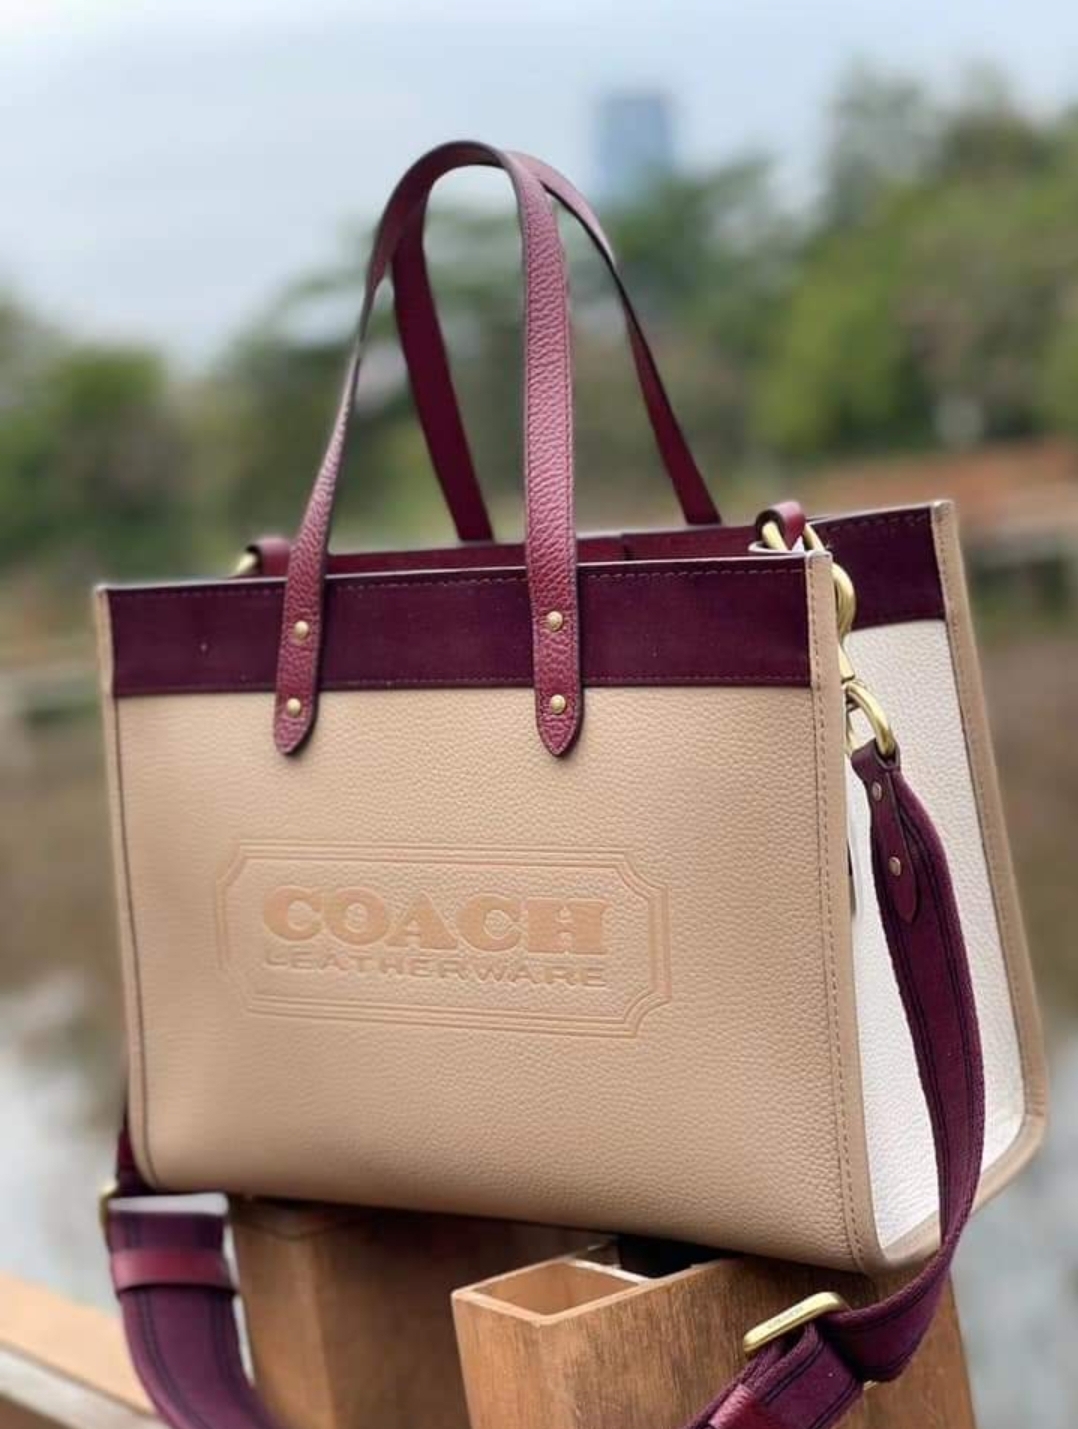 Authentic Coach Field Tote 30 In Colorblock With Coach Badge C6035